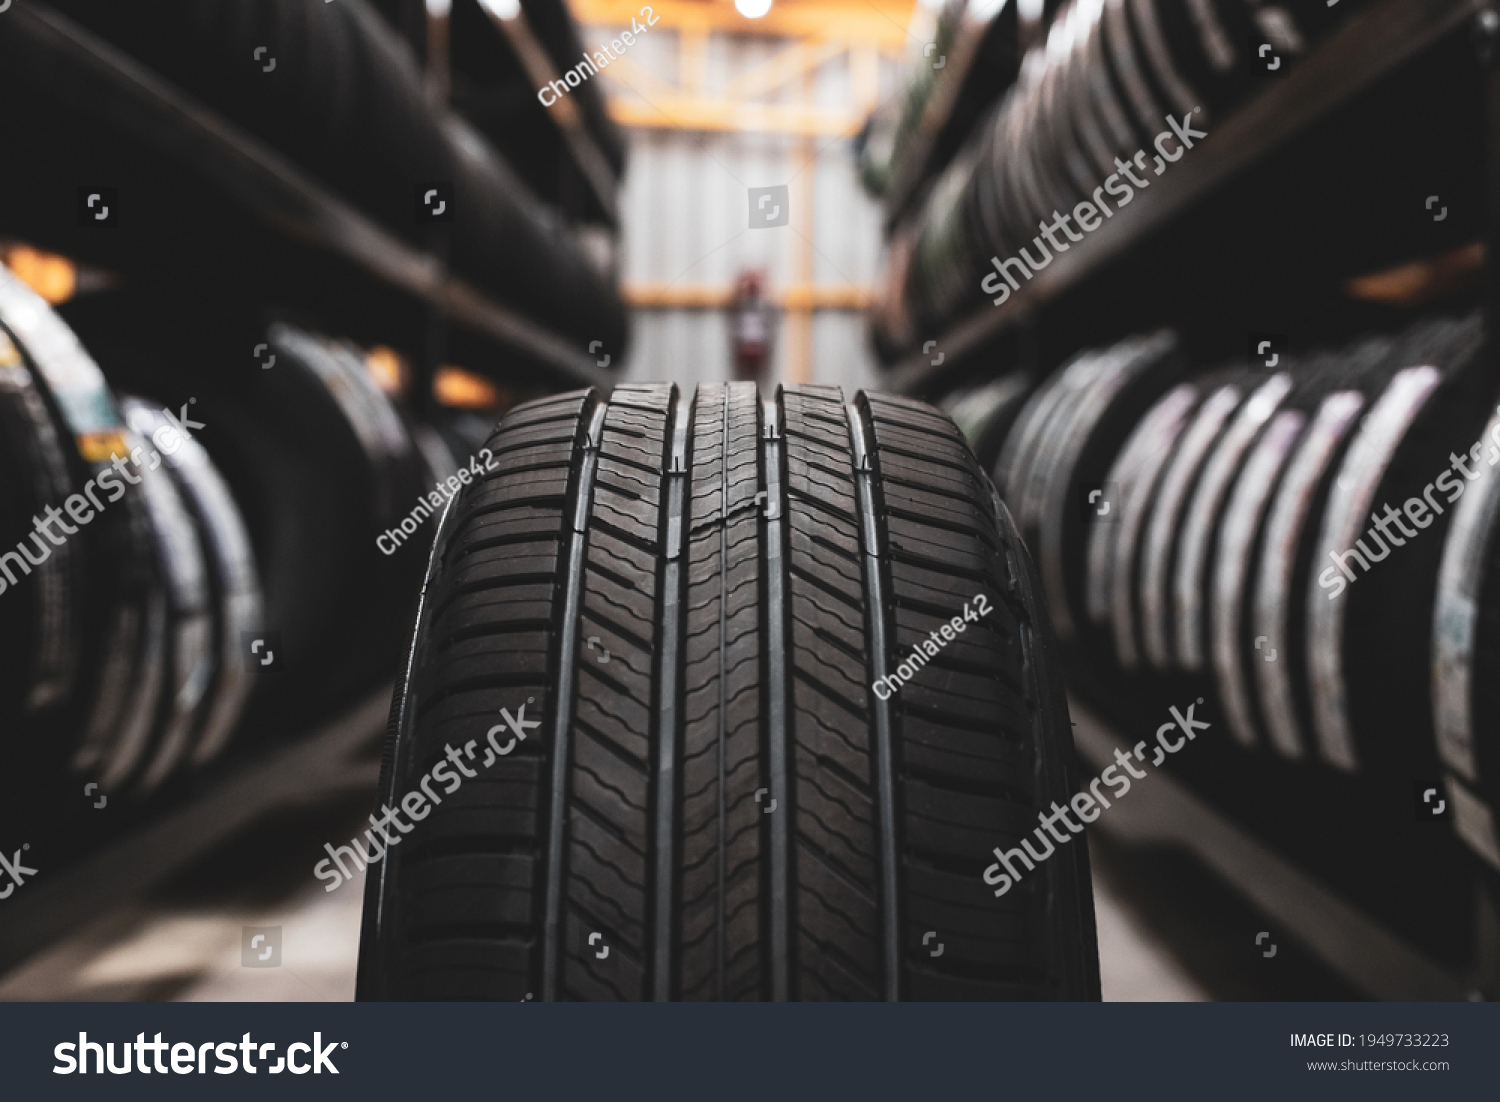 A new tire is placed on the tire storage rack in the car workshop. Be prepared for vehicles that need to change tires. #1949733223